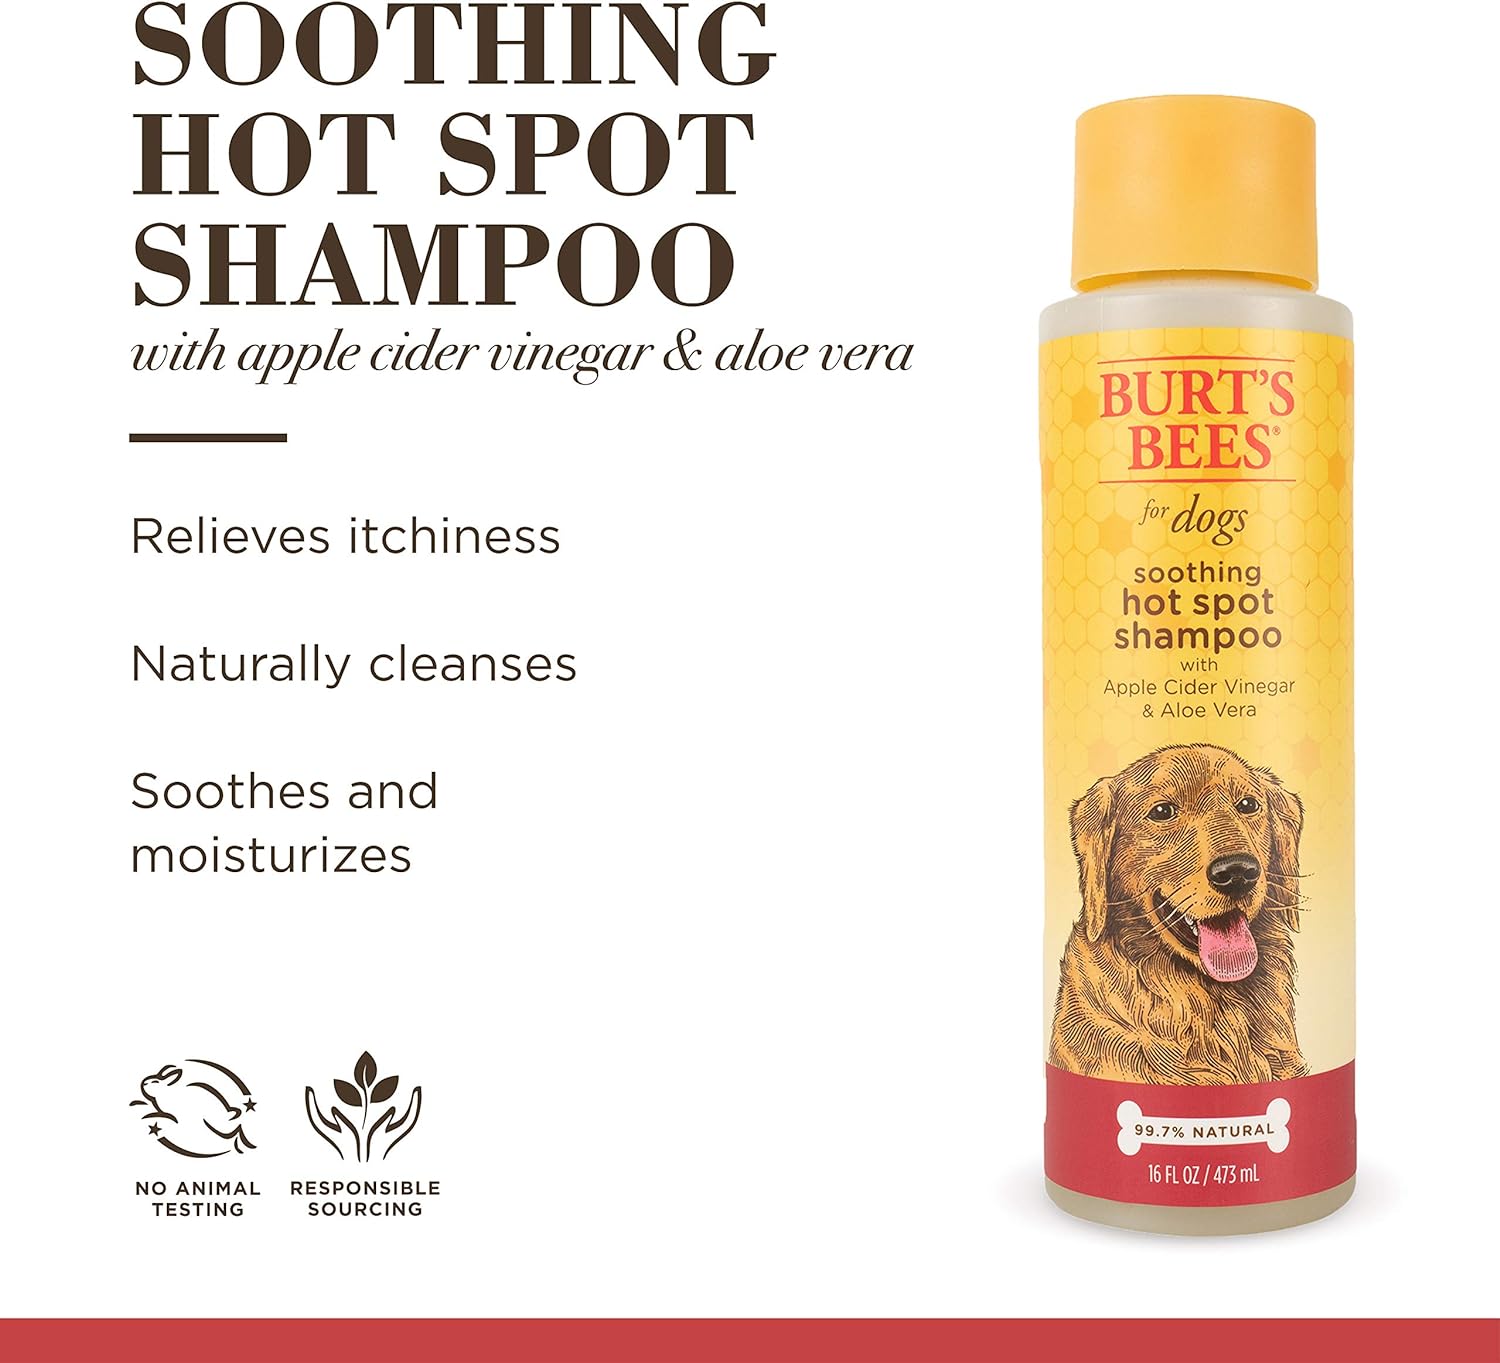 Burt's Bees for Pets Natural Hot Spot Shampoo with Apple Cider Vinegar & Aloe Vera | Soothing & Relieving Hot Spot Remedy for Dog | Cruelty Free, Sulfate & Paraben Free, pH Balanced for Dogs | 16 Oz : Pet Shampoos : Pet Supplies